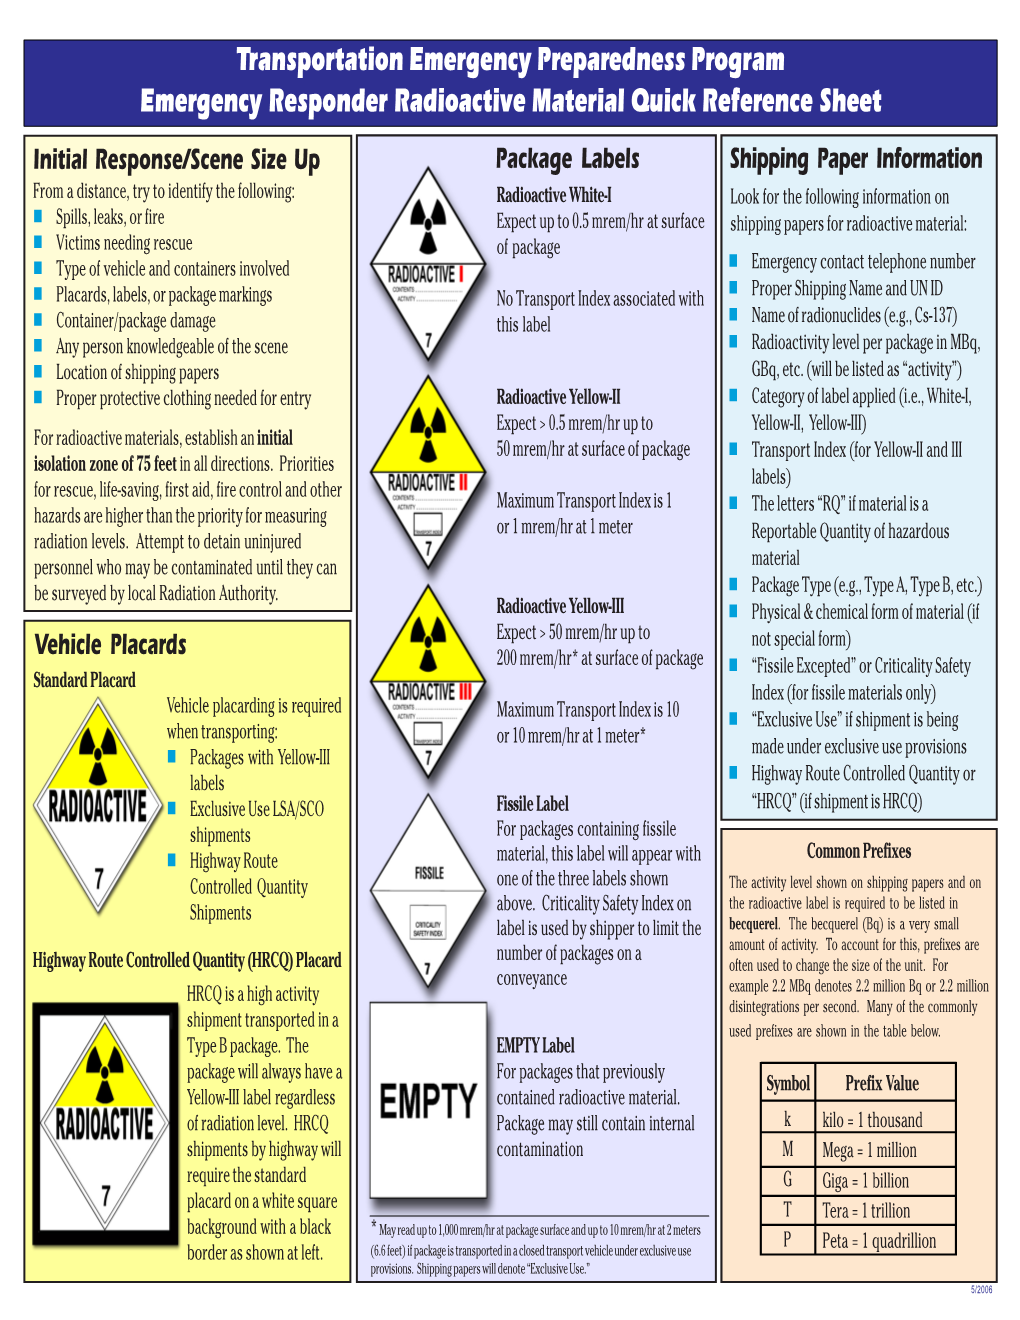 Emergency Responder Radioactive Material Quick Reference Sheet